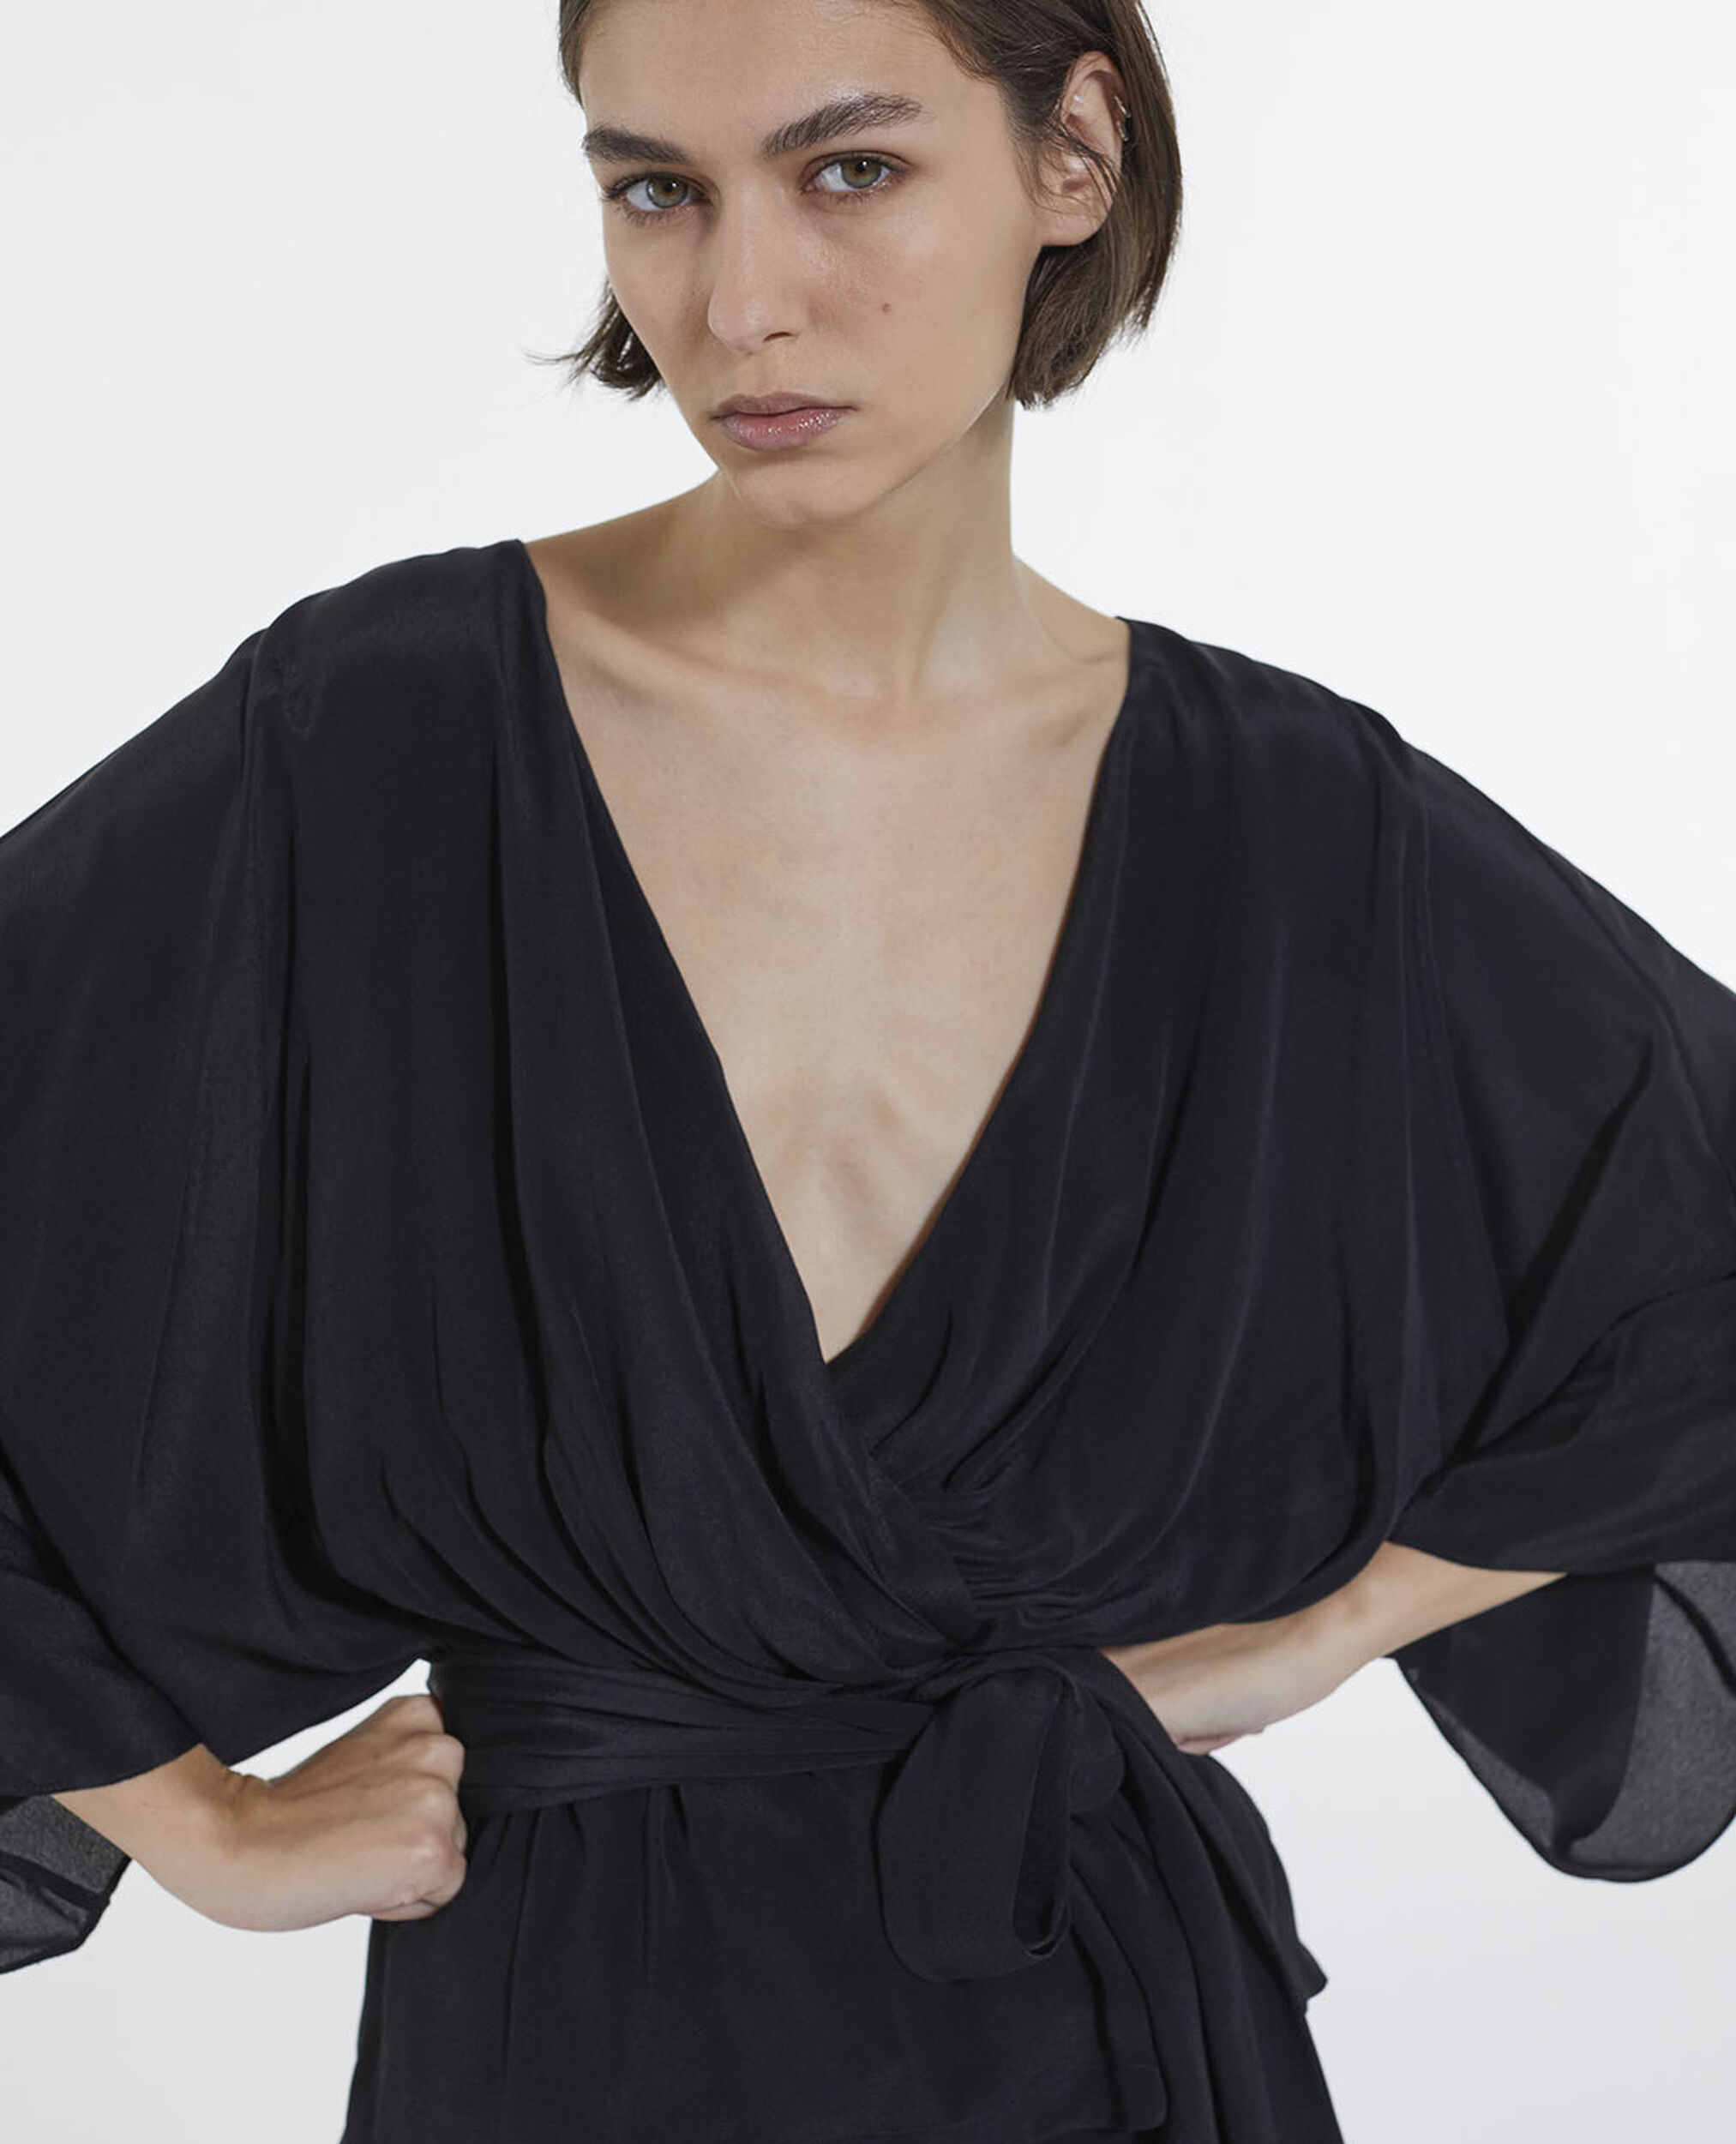 Black kimono top with long draped sleeves, BLACK, hi-res image number null